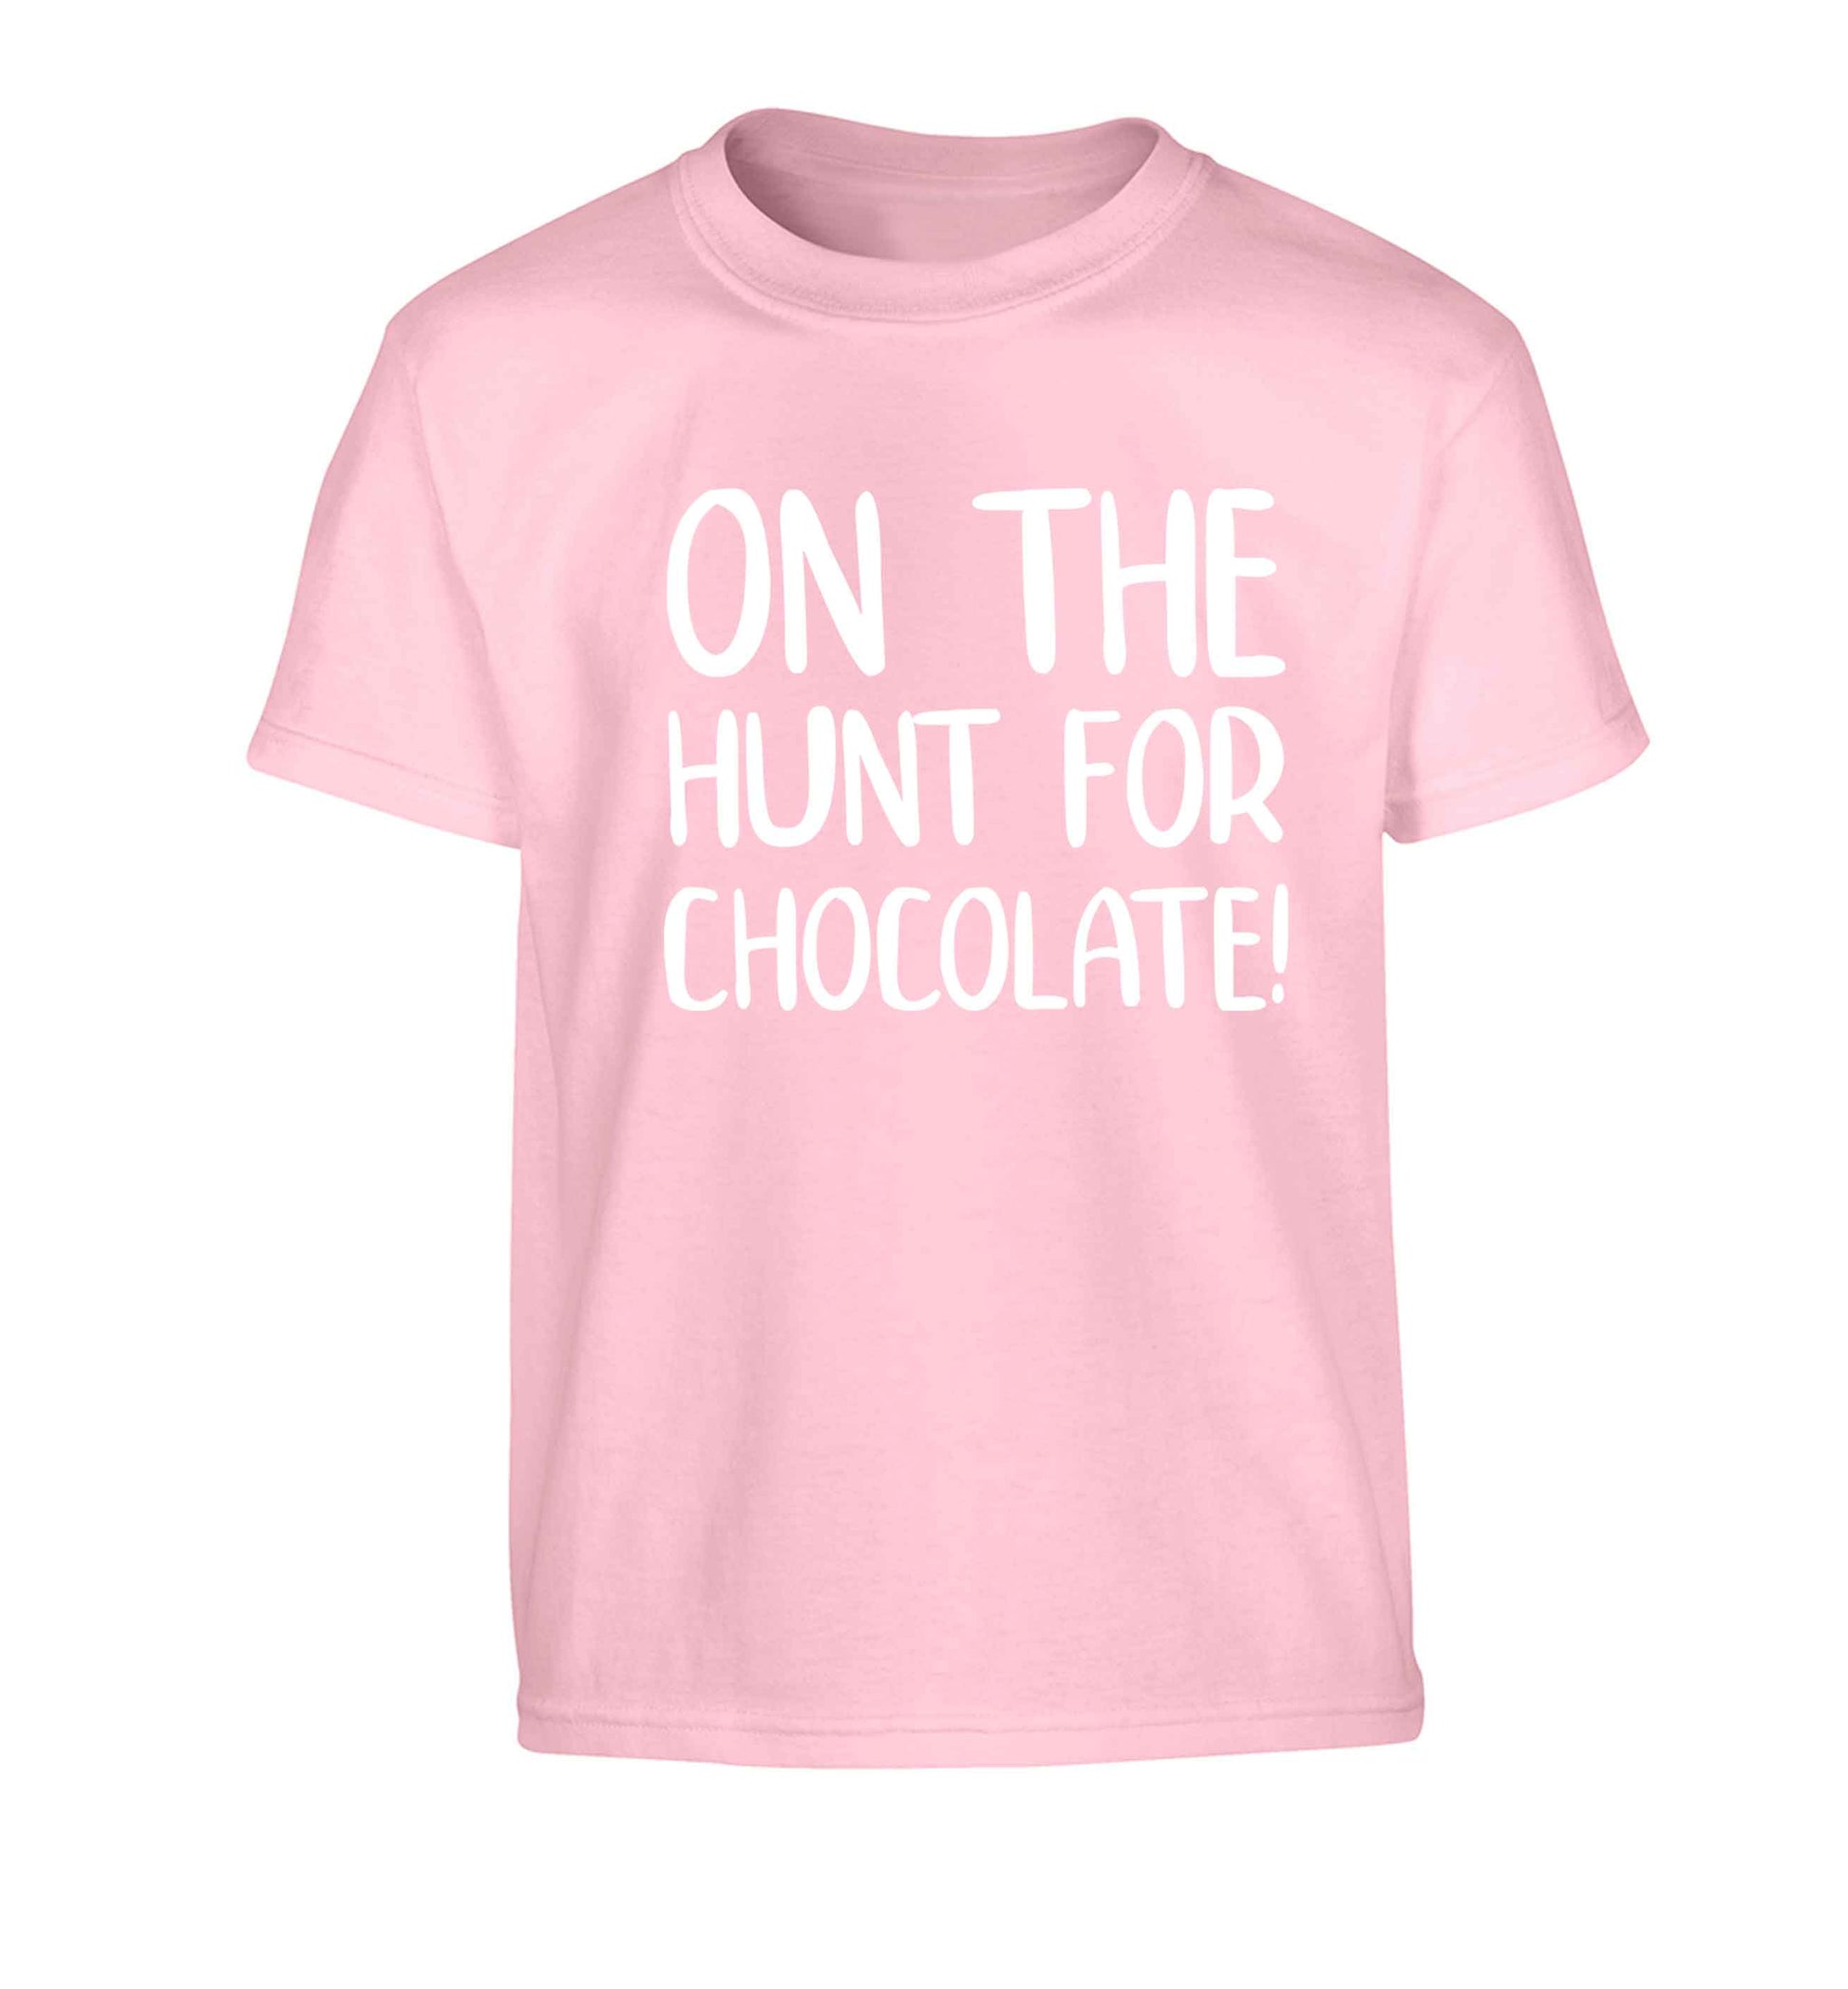 On the hunt for chocolate! Children's light pink Tshirt 12-13 Years